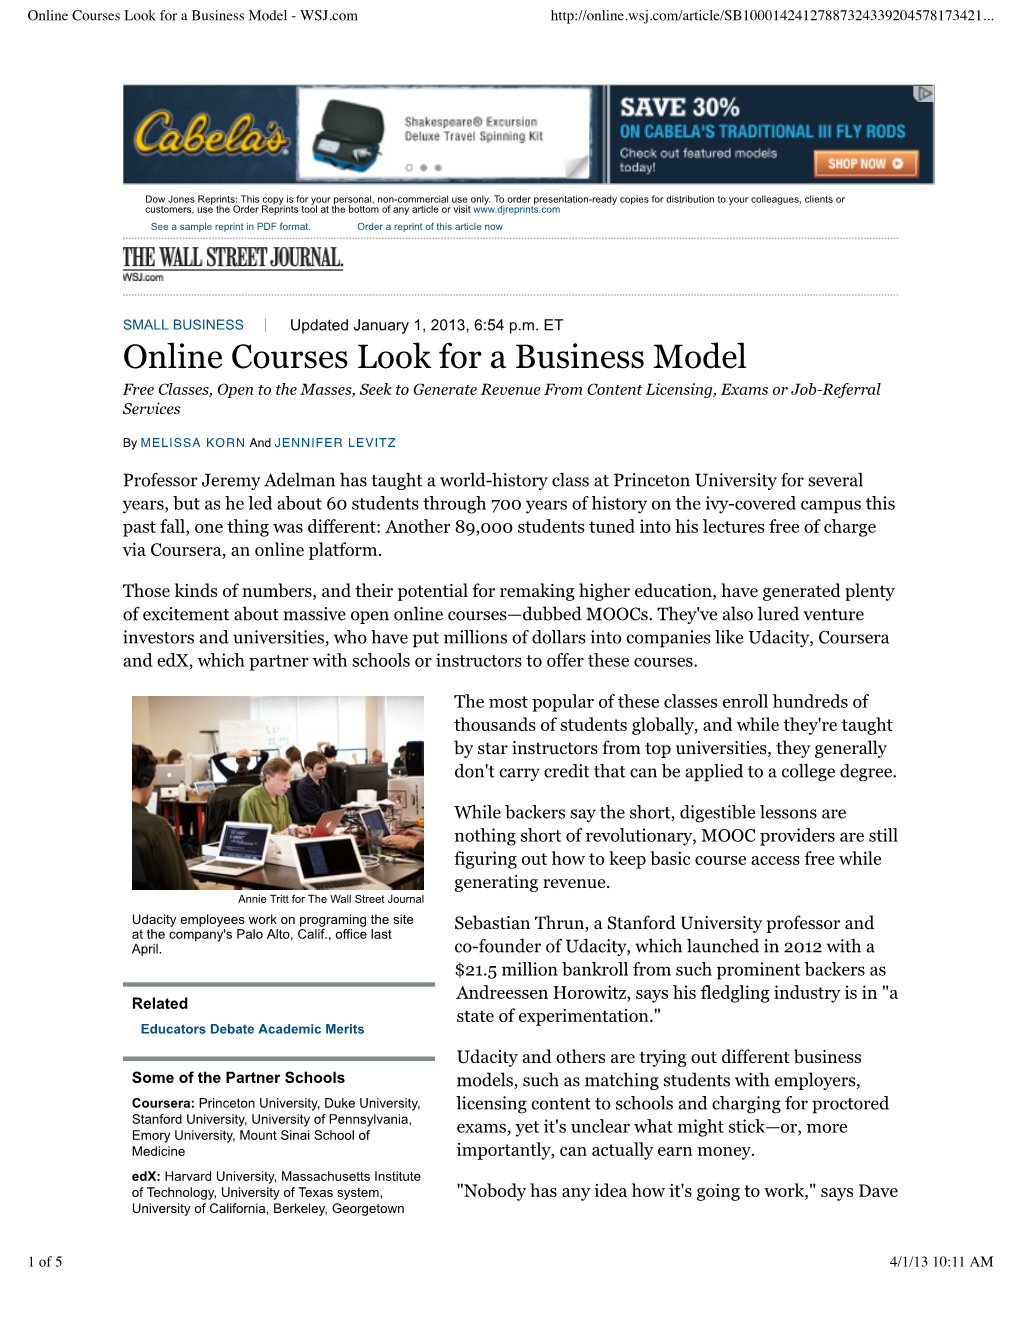 Online Courses Look for a Business Model - WSJ.Com